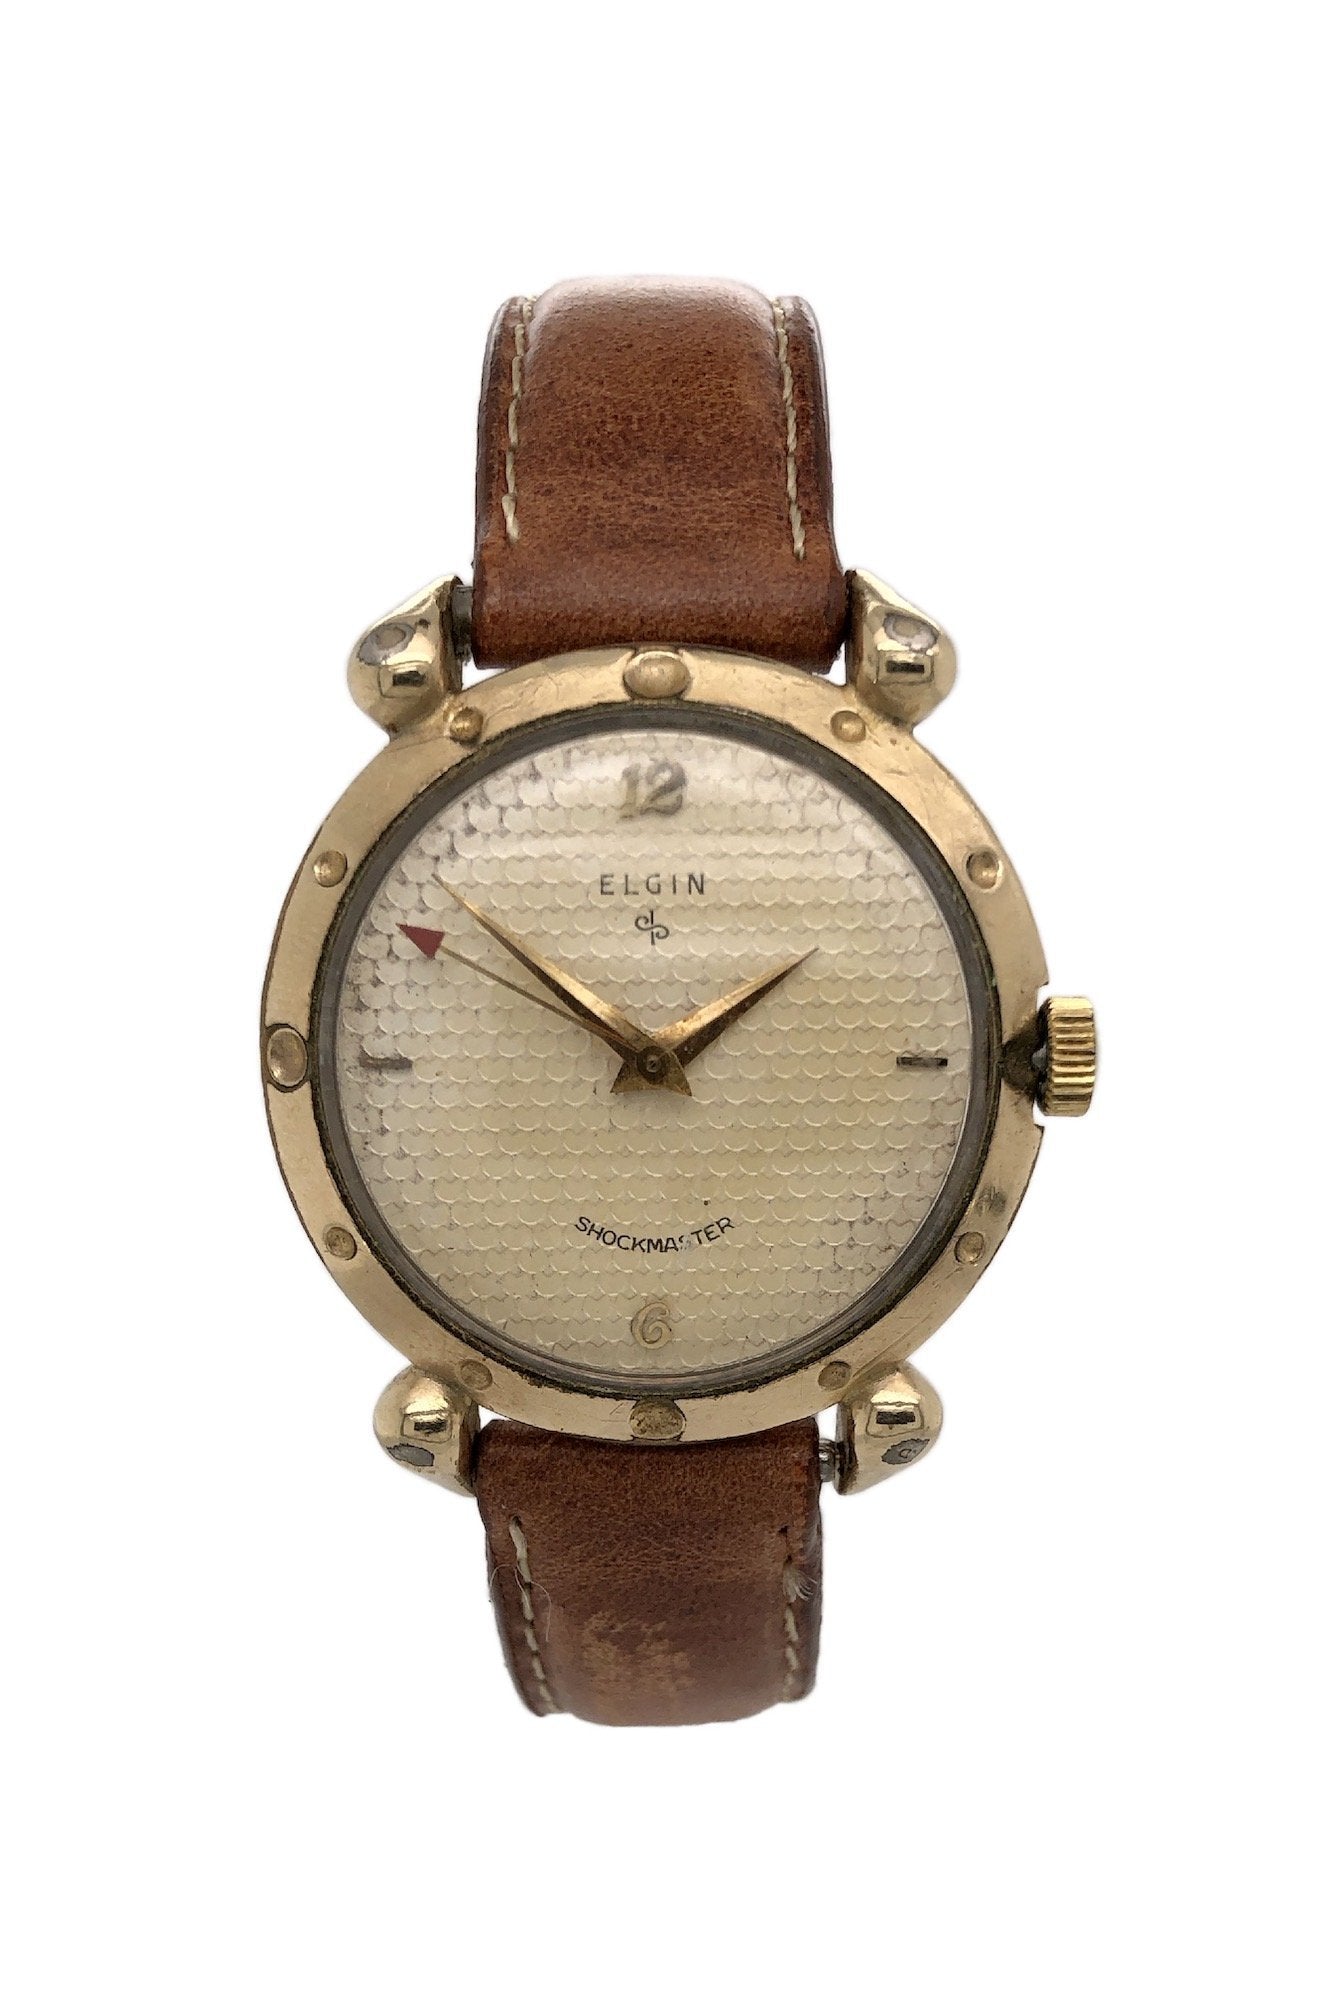 Elgin National Watch Co Shockmaster - Counting Time Watch Purveyors